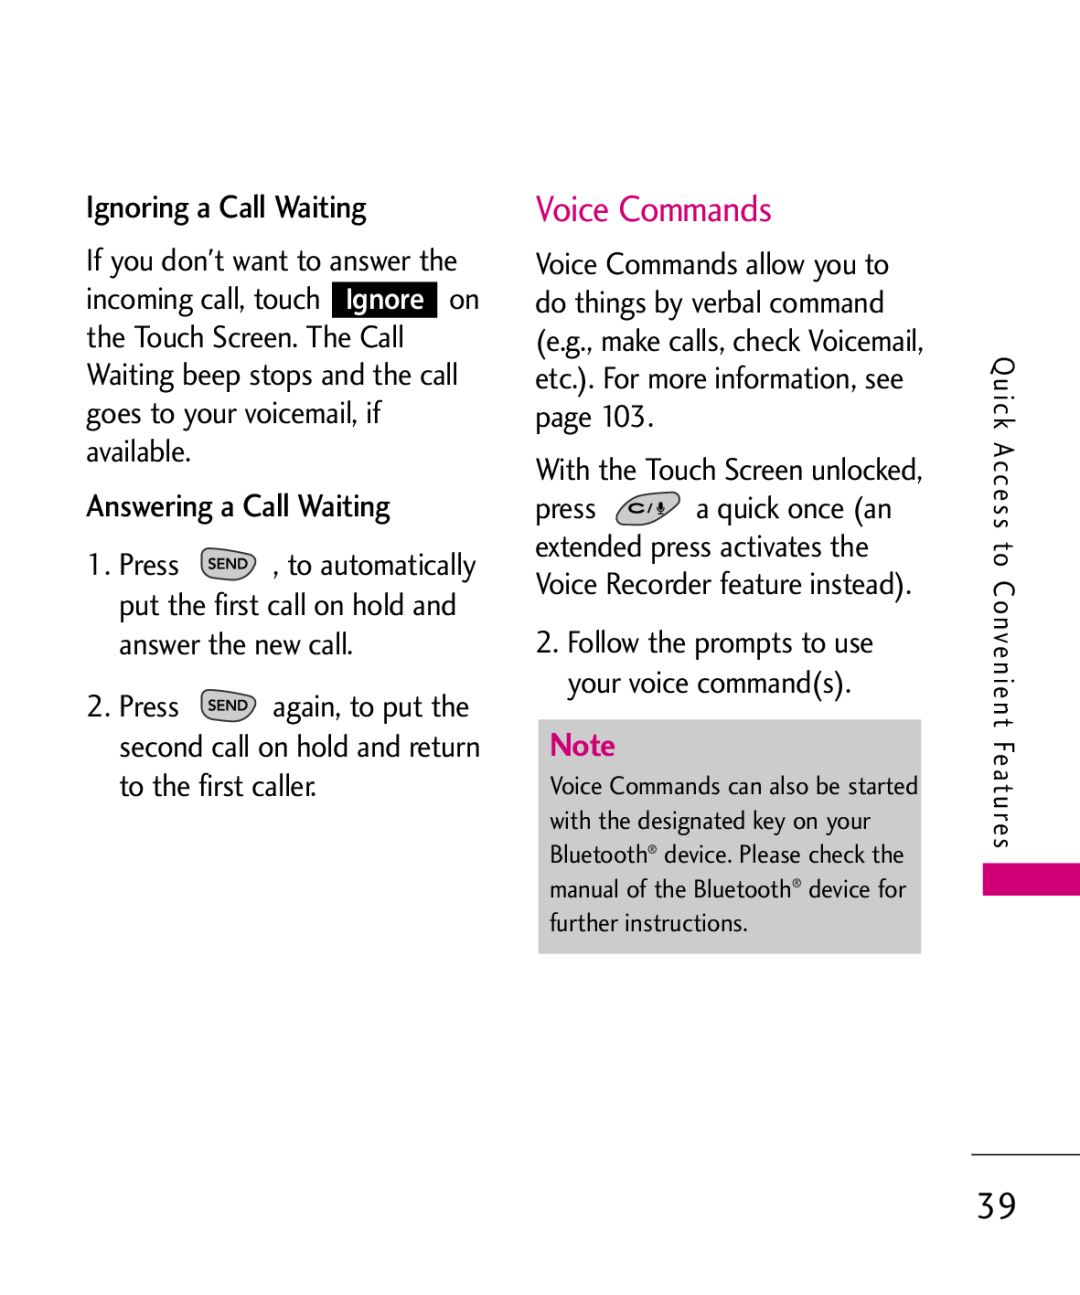 LG Electronics MMBB0379501 manual Voice Commands, Ignoring a Call Waiting, Answering a Call Waiting 